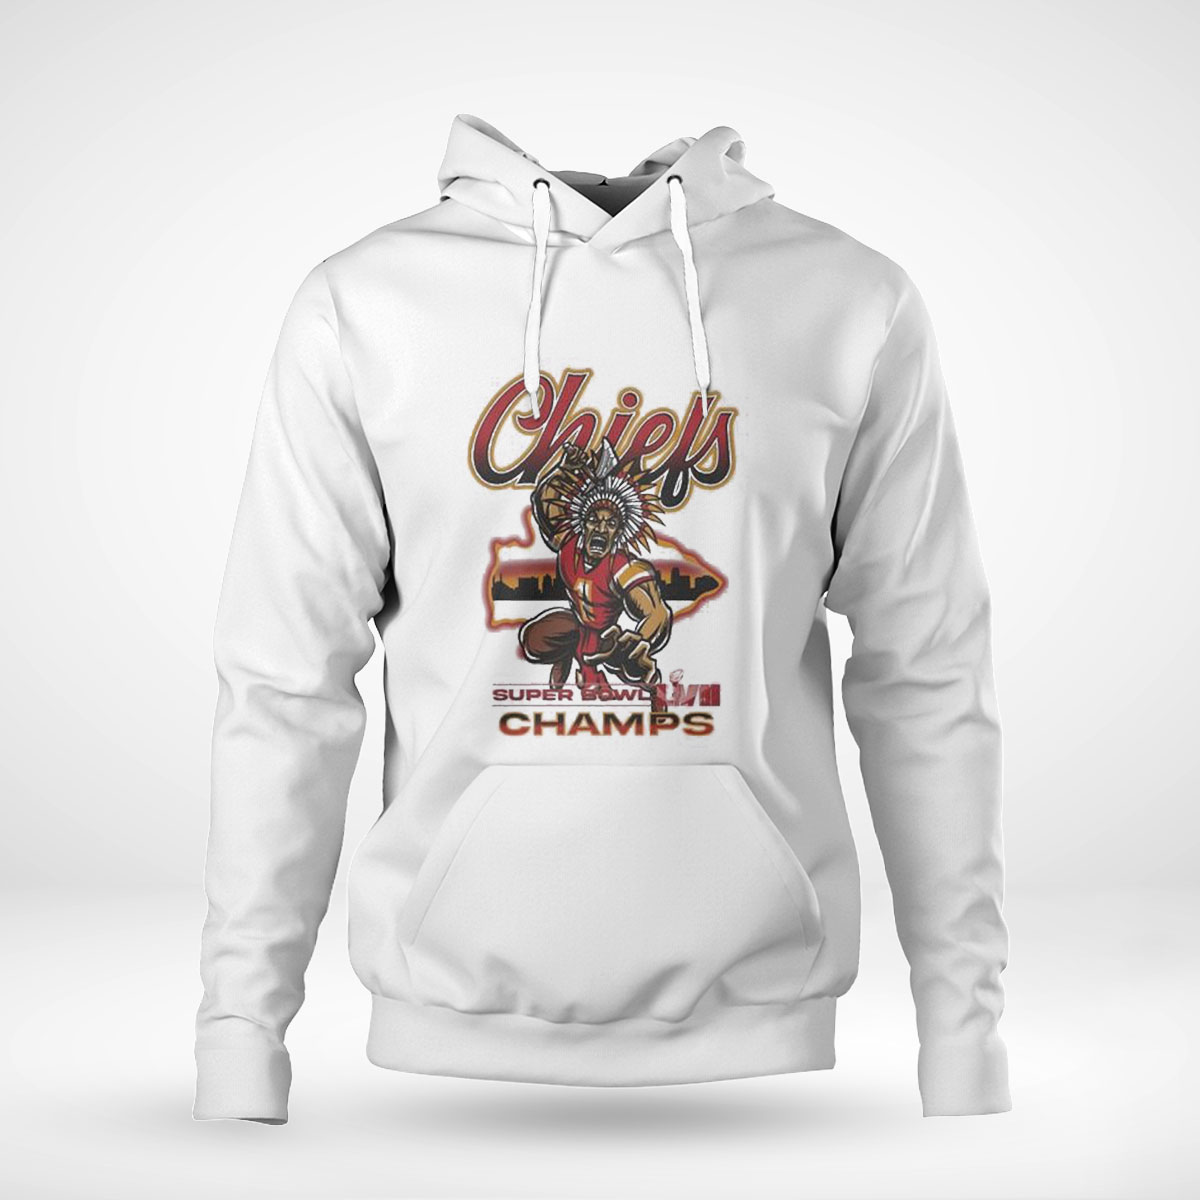 Official Chiefs Sb Lvii Champs T-shirt